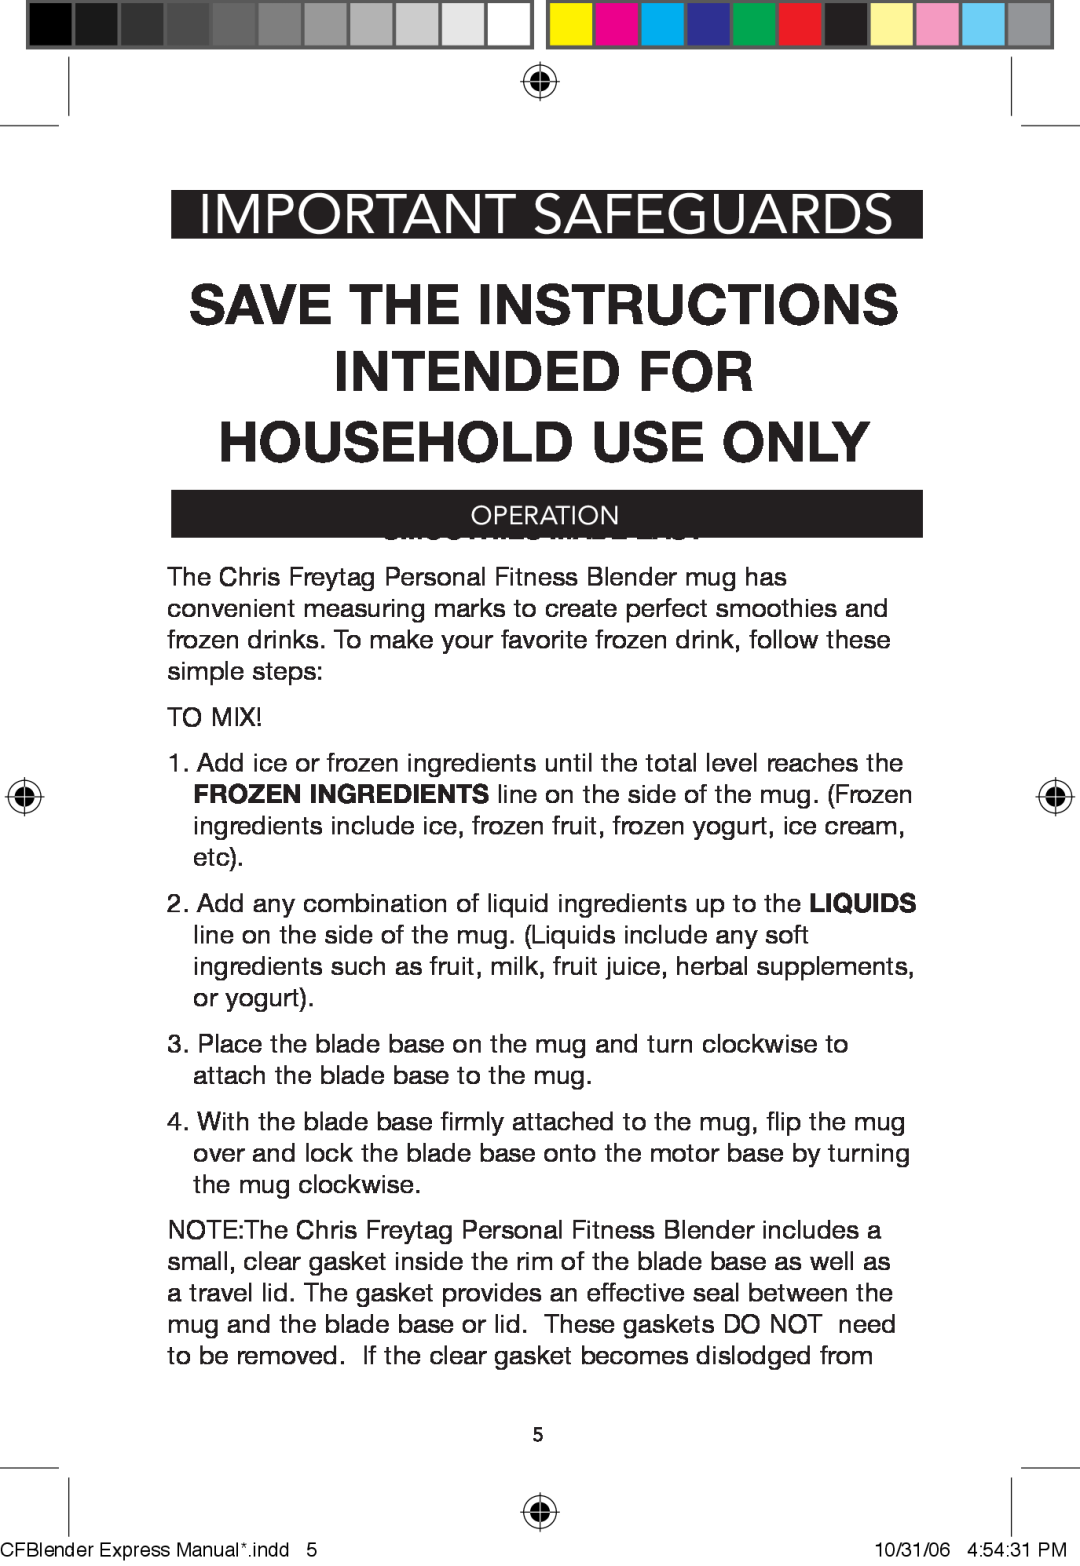 West Bend Back to Basics BPE3CF Operation, Important Safeguards, Save The Instructions Intended For Household Use Only 